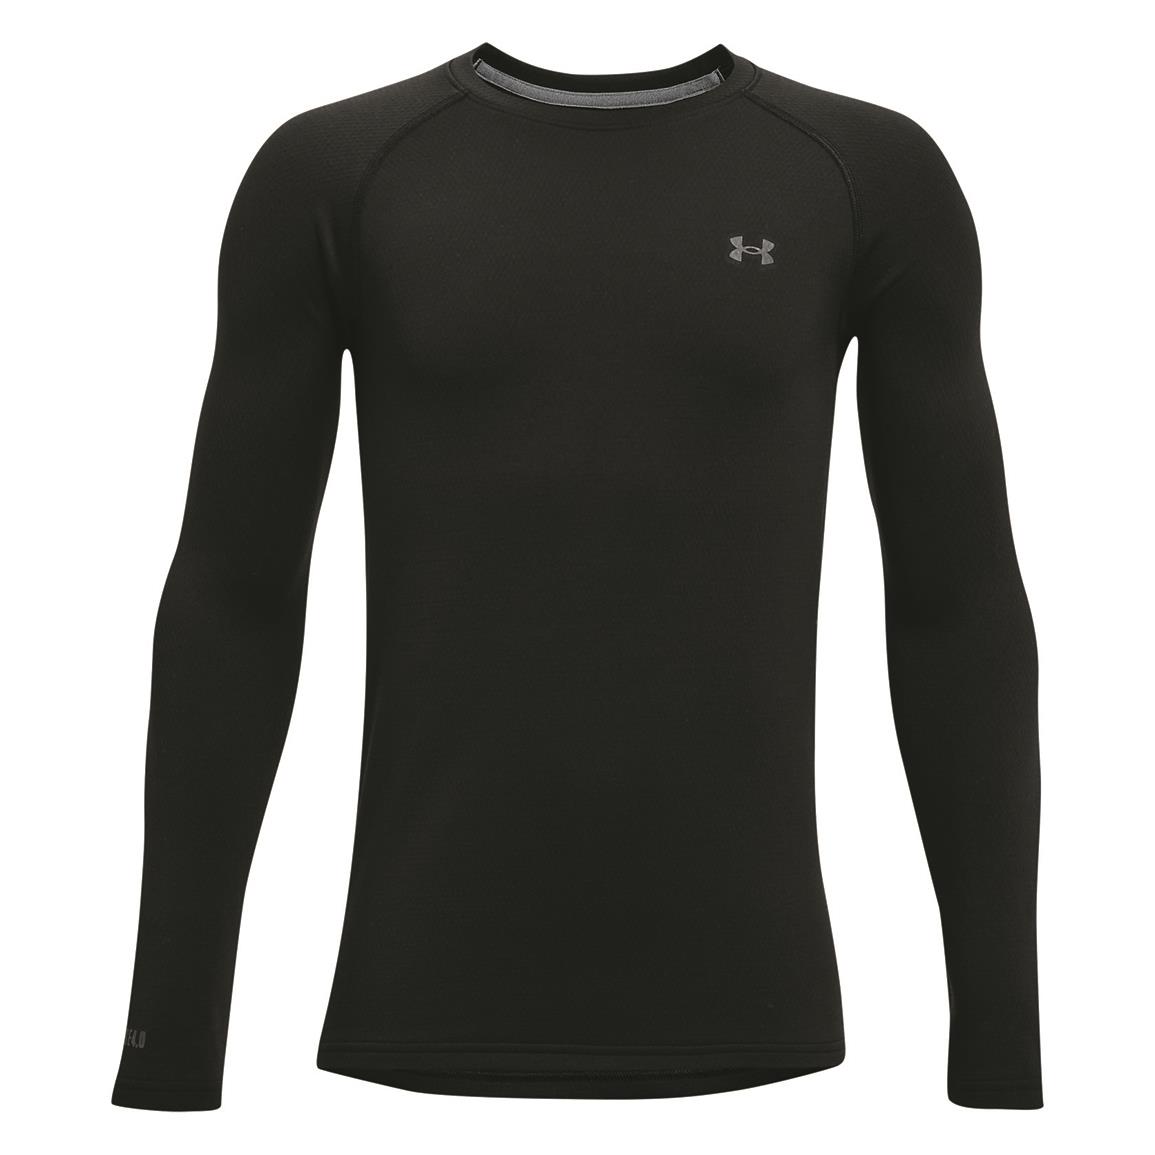 Under Armour Youth Base 4.0 Base Layer Crew Top, Black